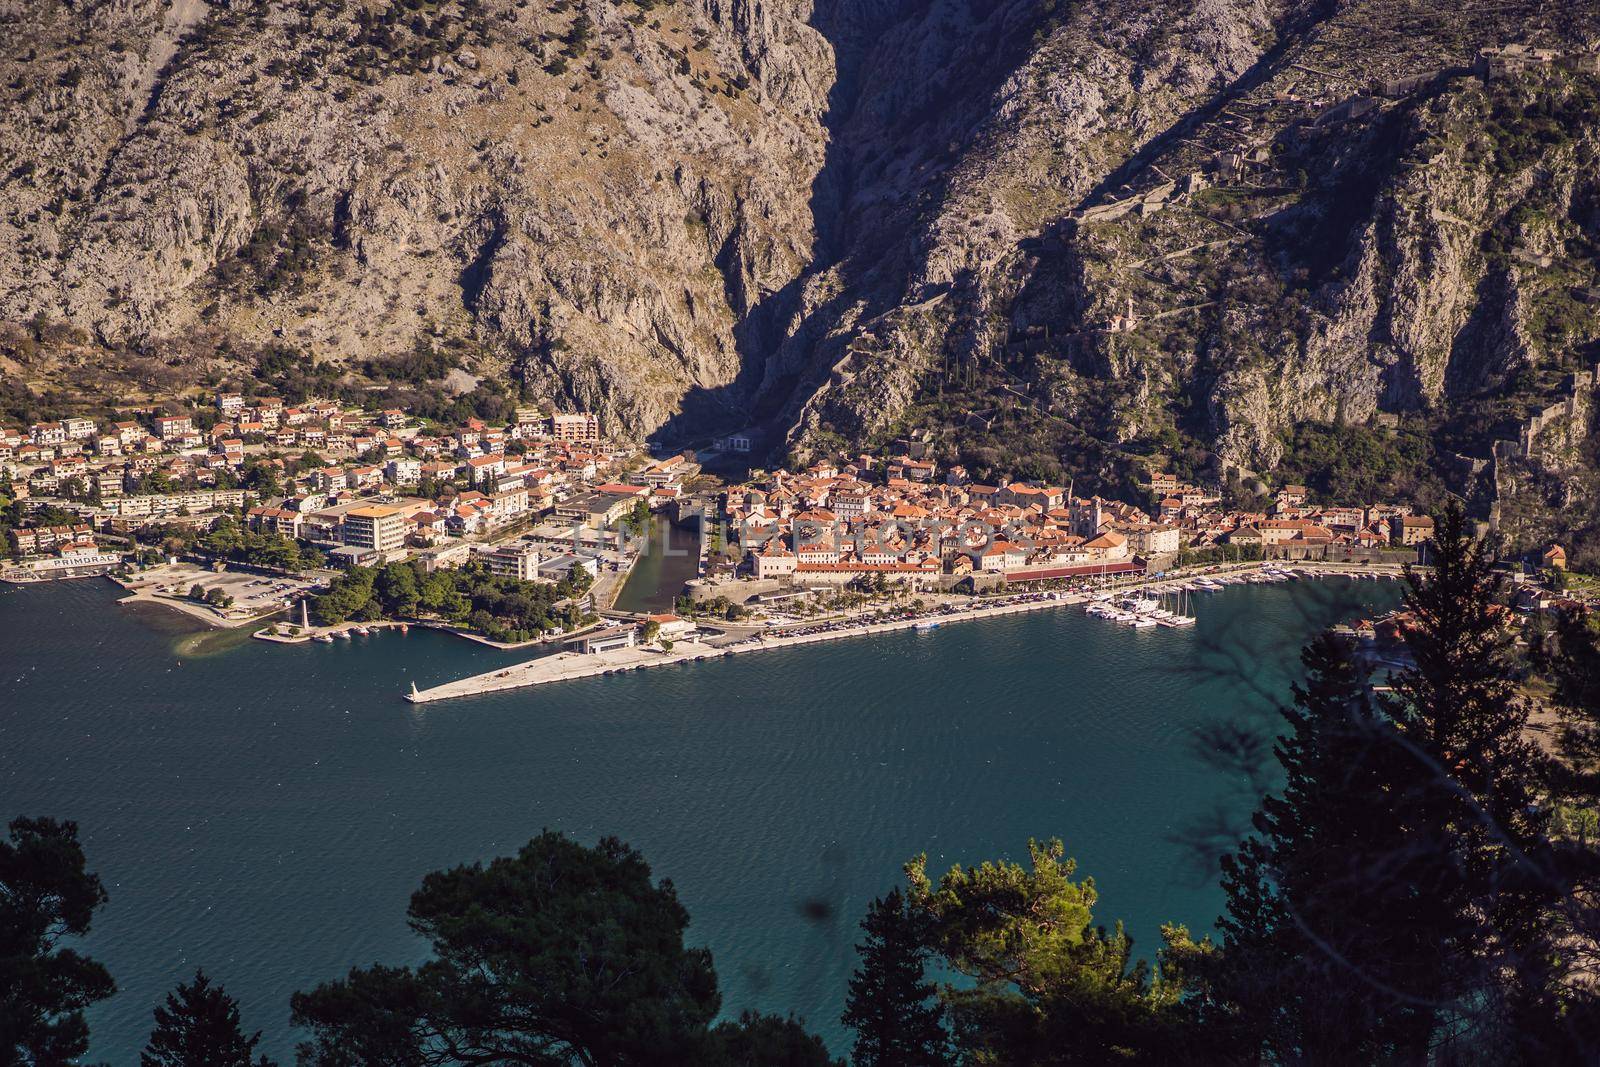 Old city. Kotor. Montenegro. Narrow streets and old houses of Kotor at sunset. View of Kotor from the city wall. View from above by galitskaya